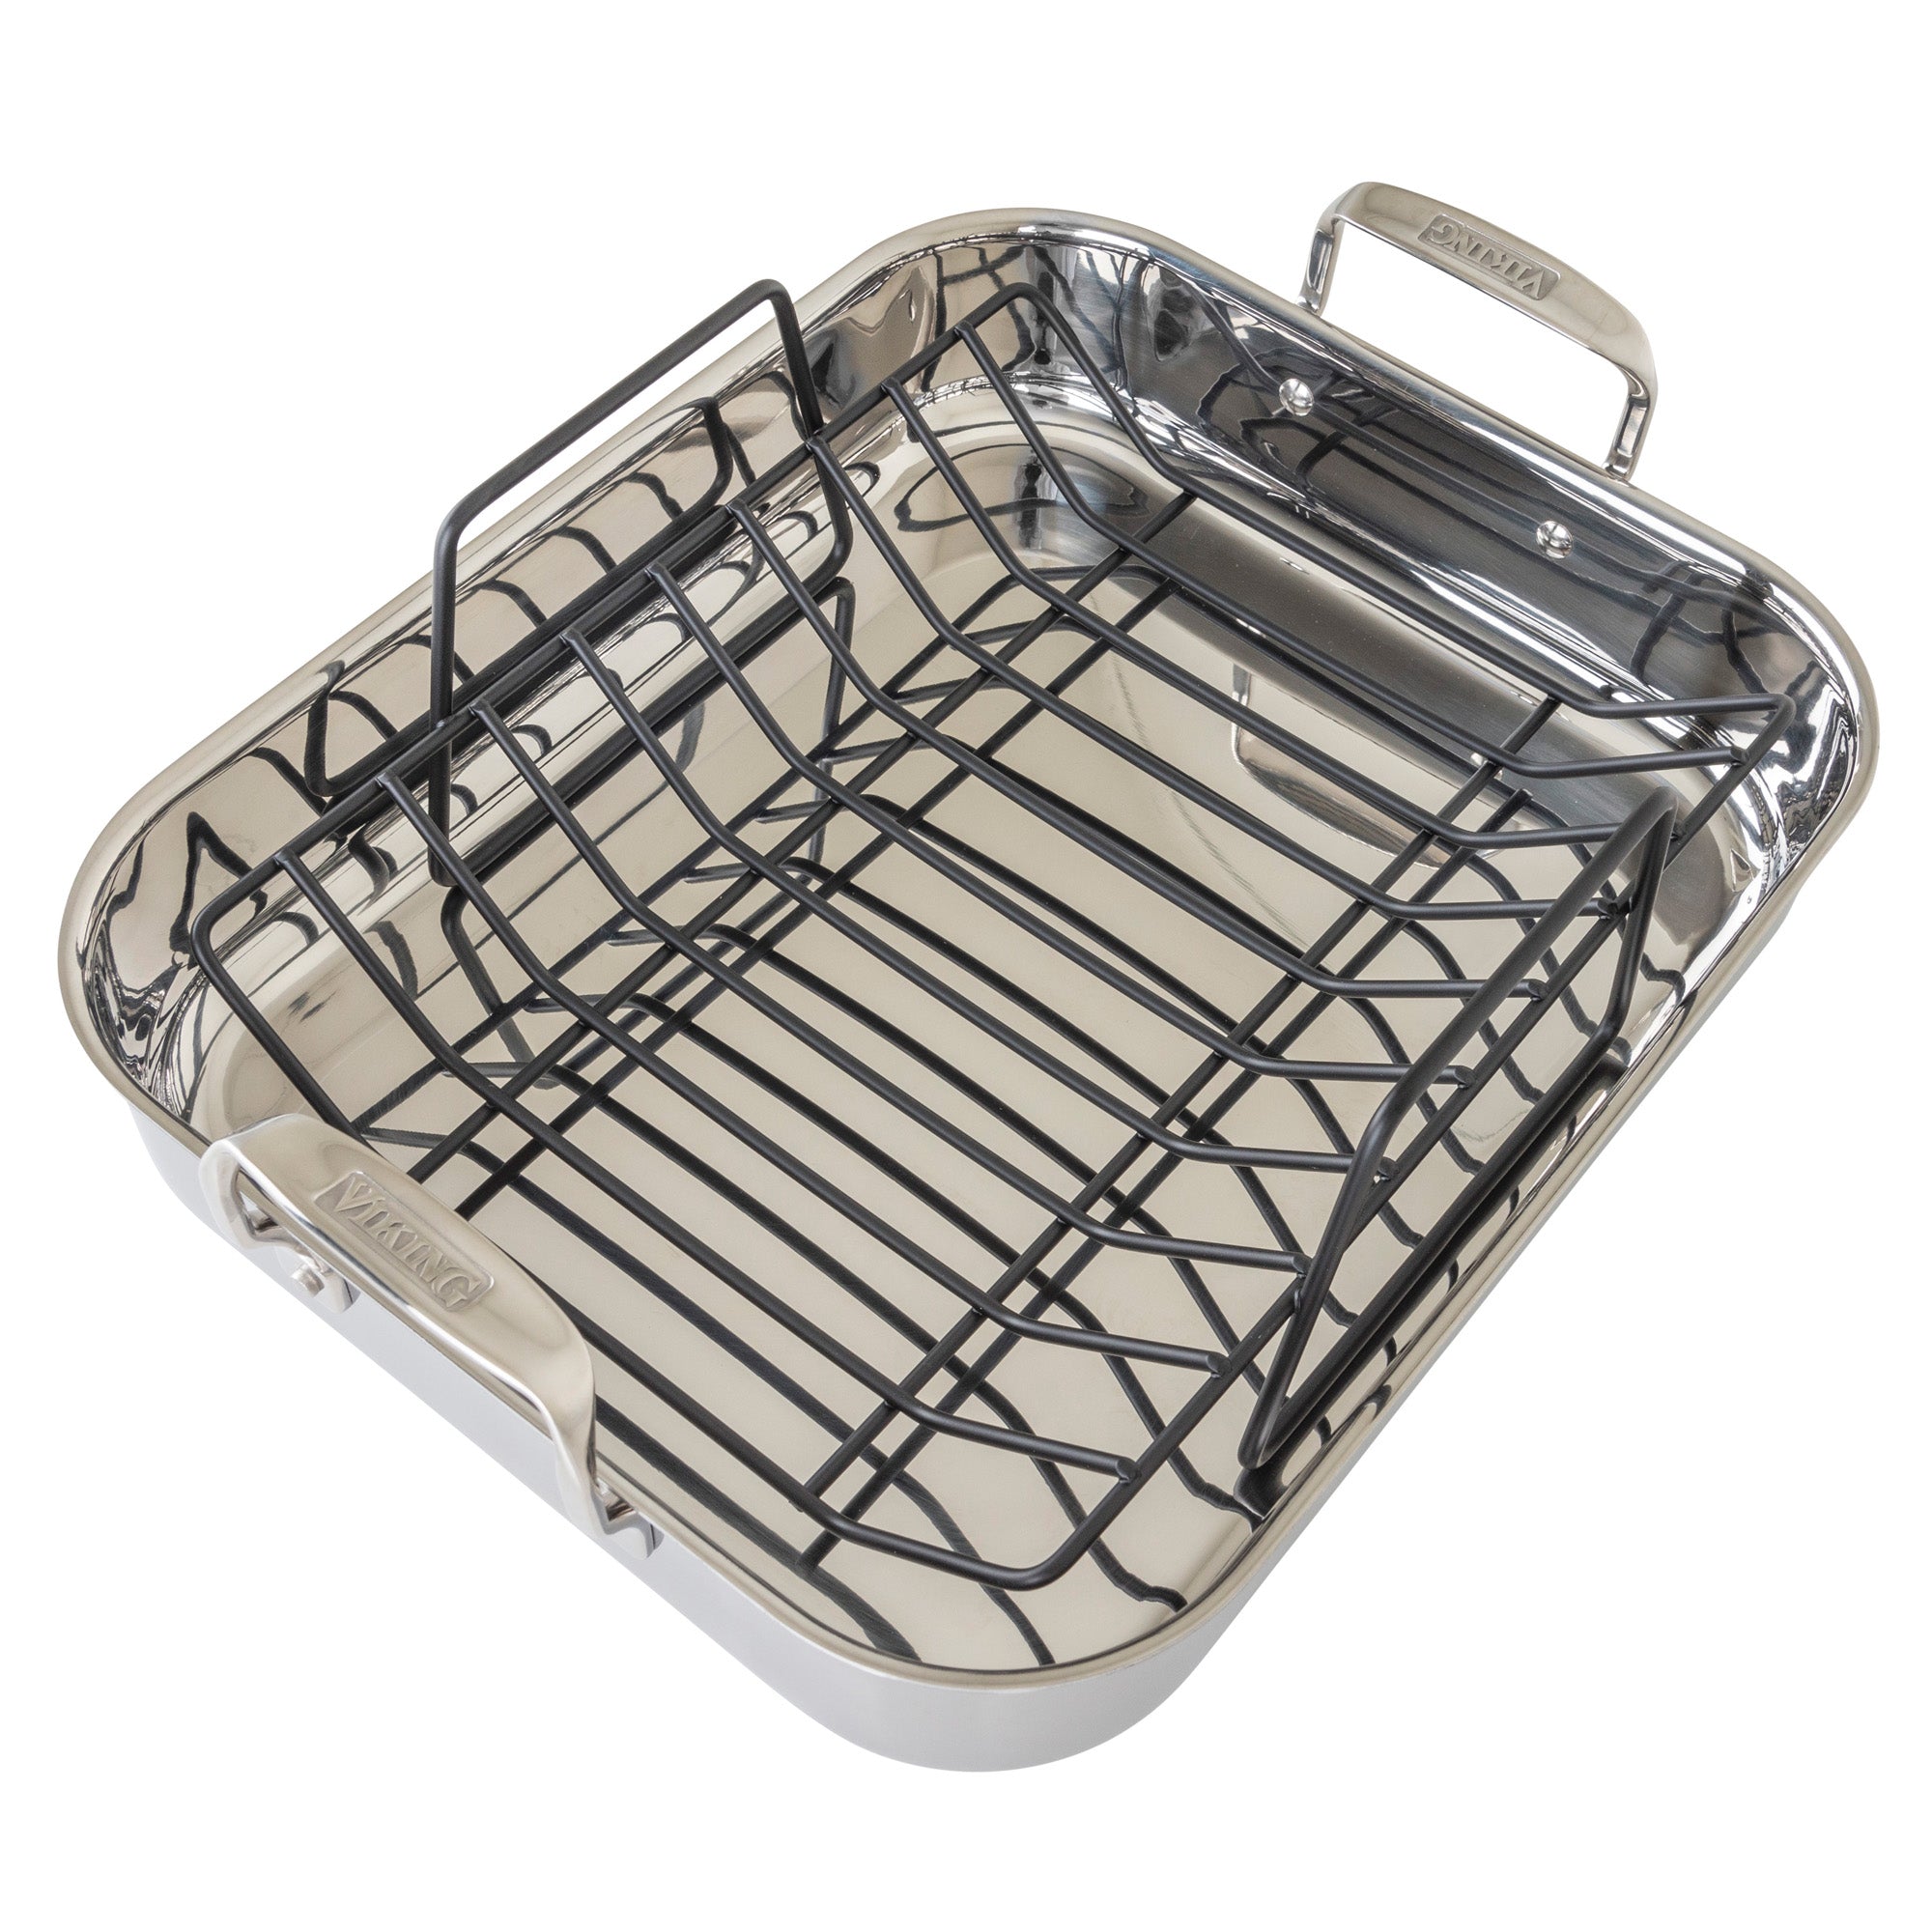 3-N-1 BAKE and ROAST PANS with Wire Rack 5Ply T304 Stainless Steel